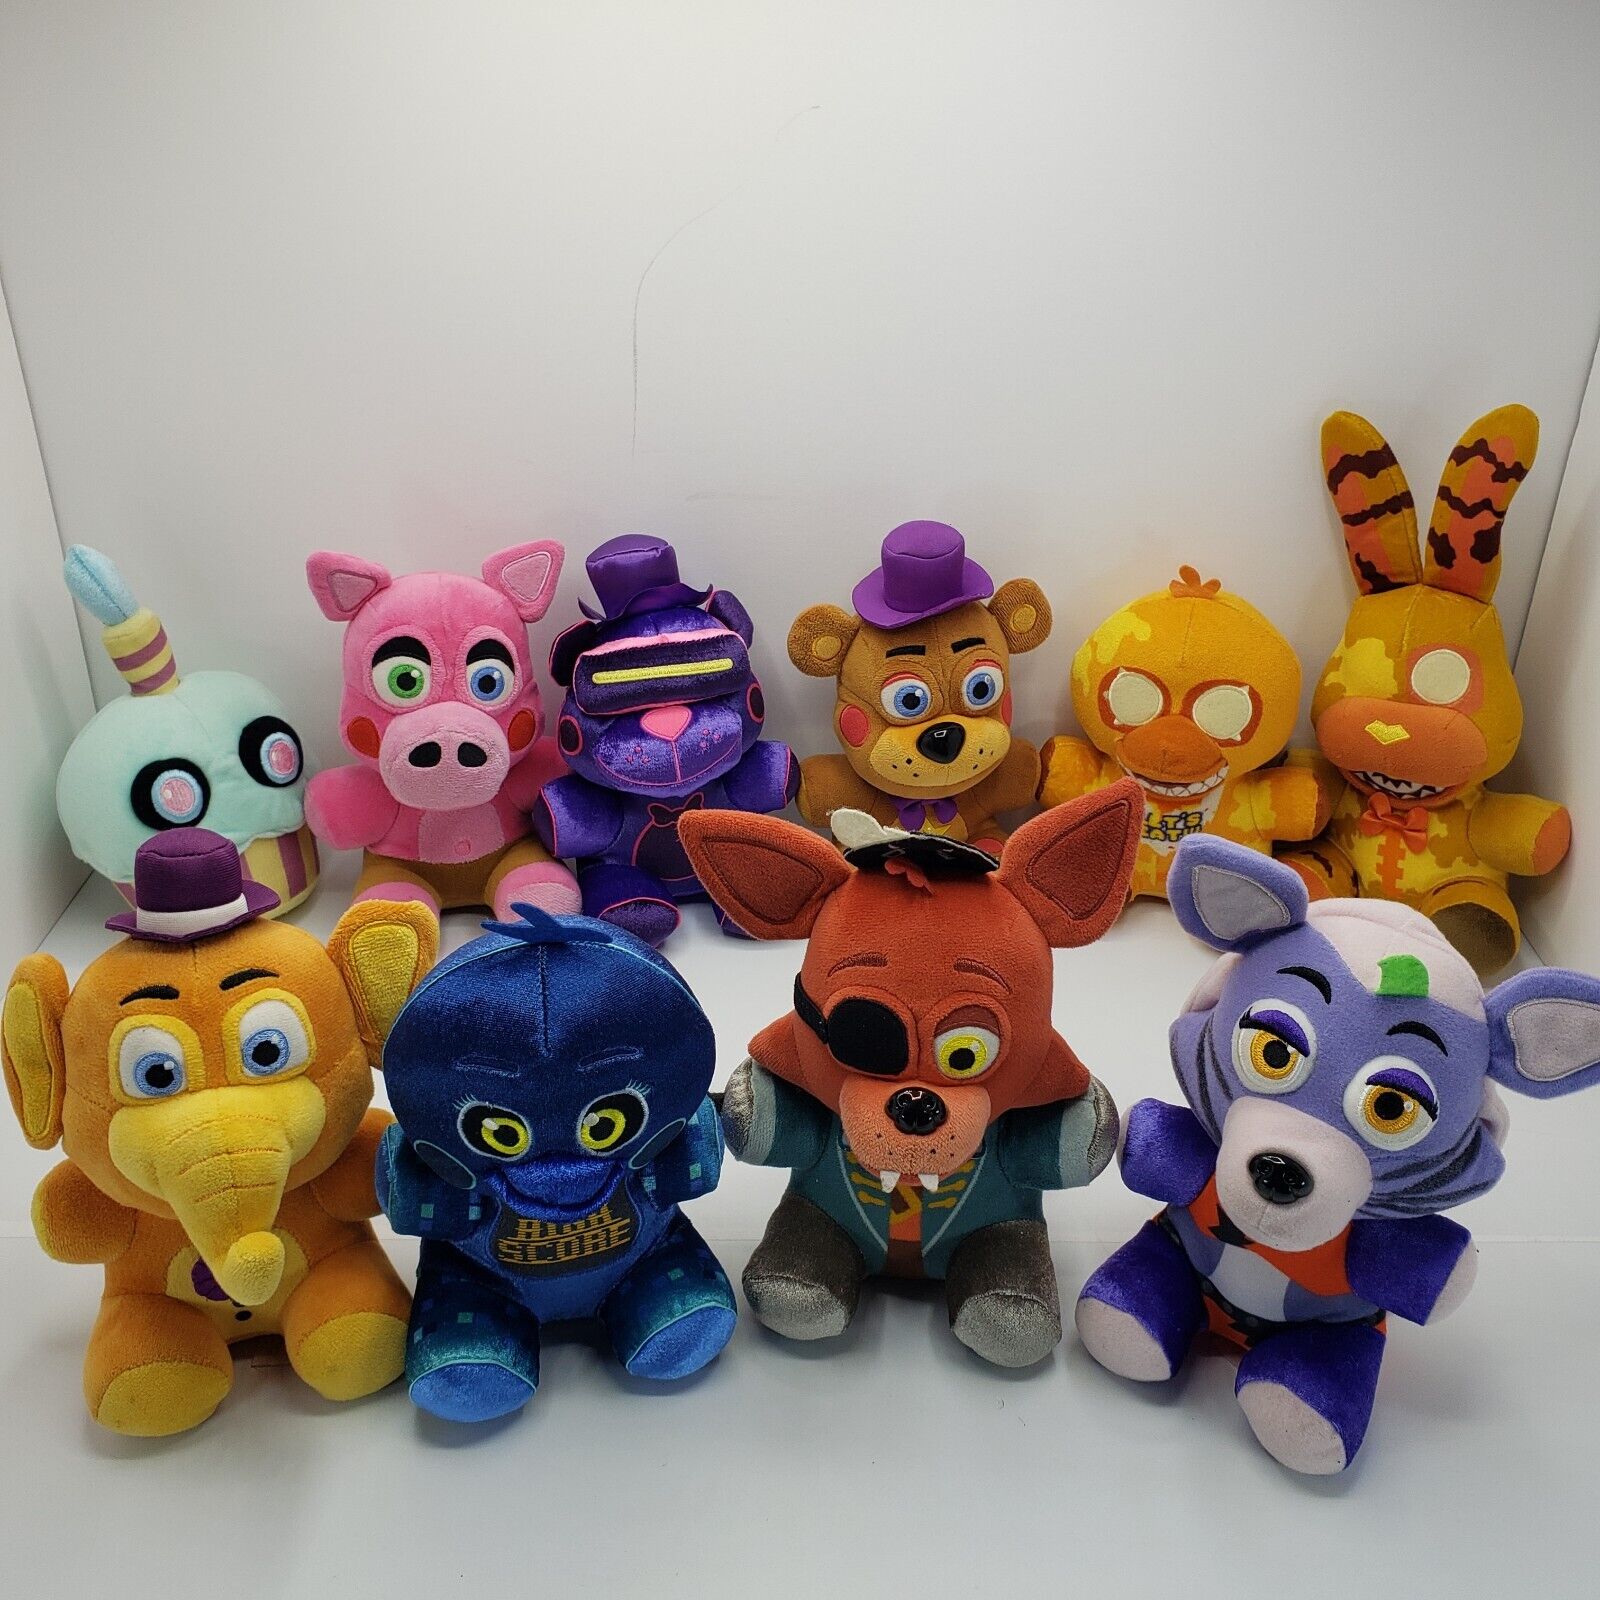 Lot Of 10 Funko Five Nights At Freddy's 8 in Plushies Pre Owned